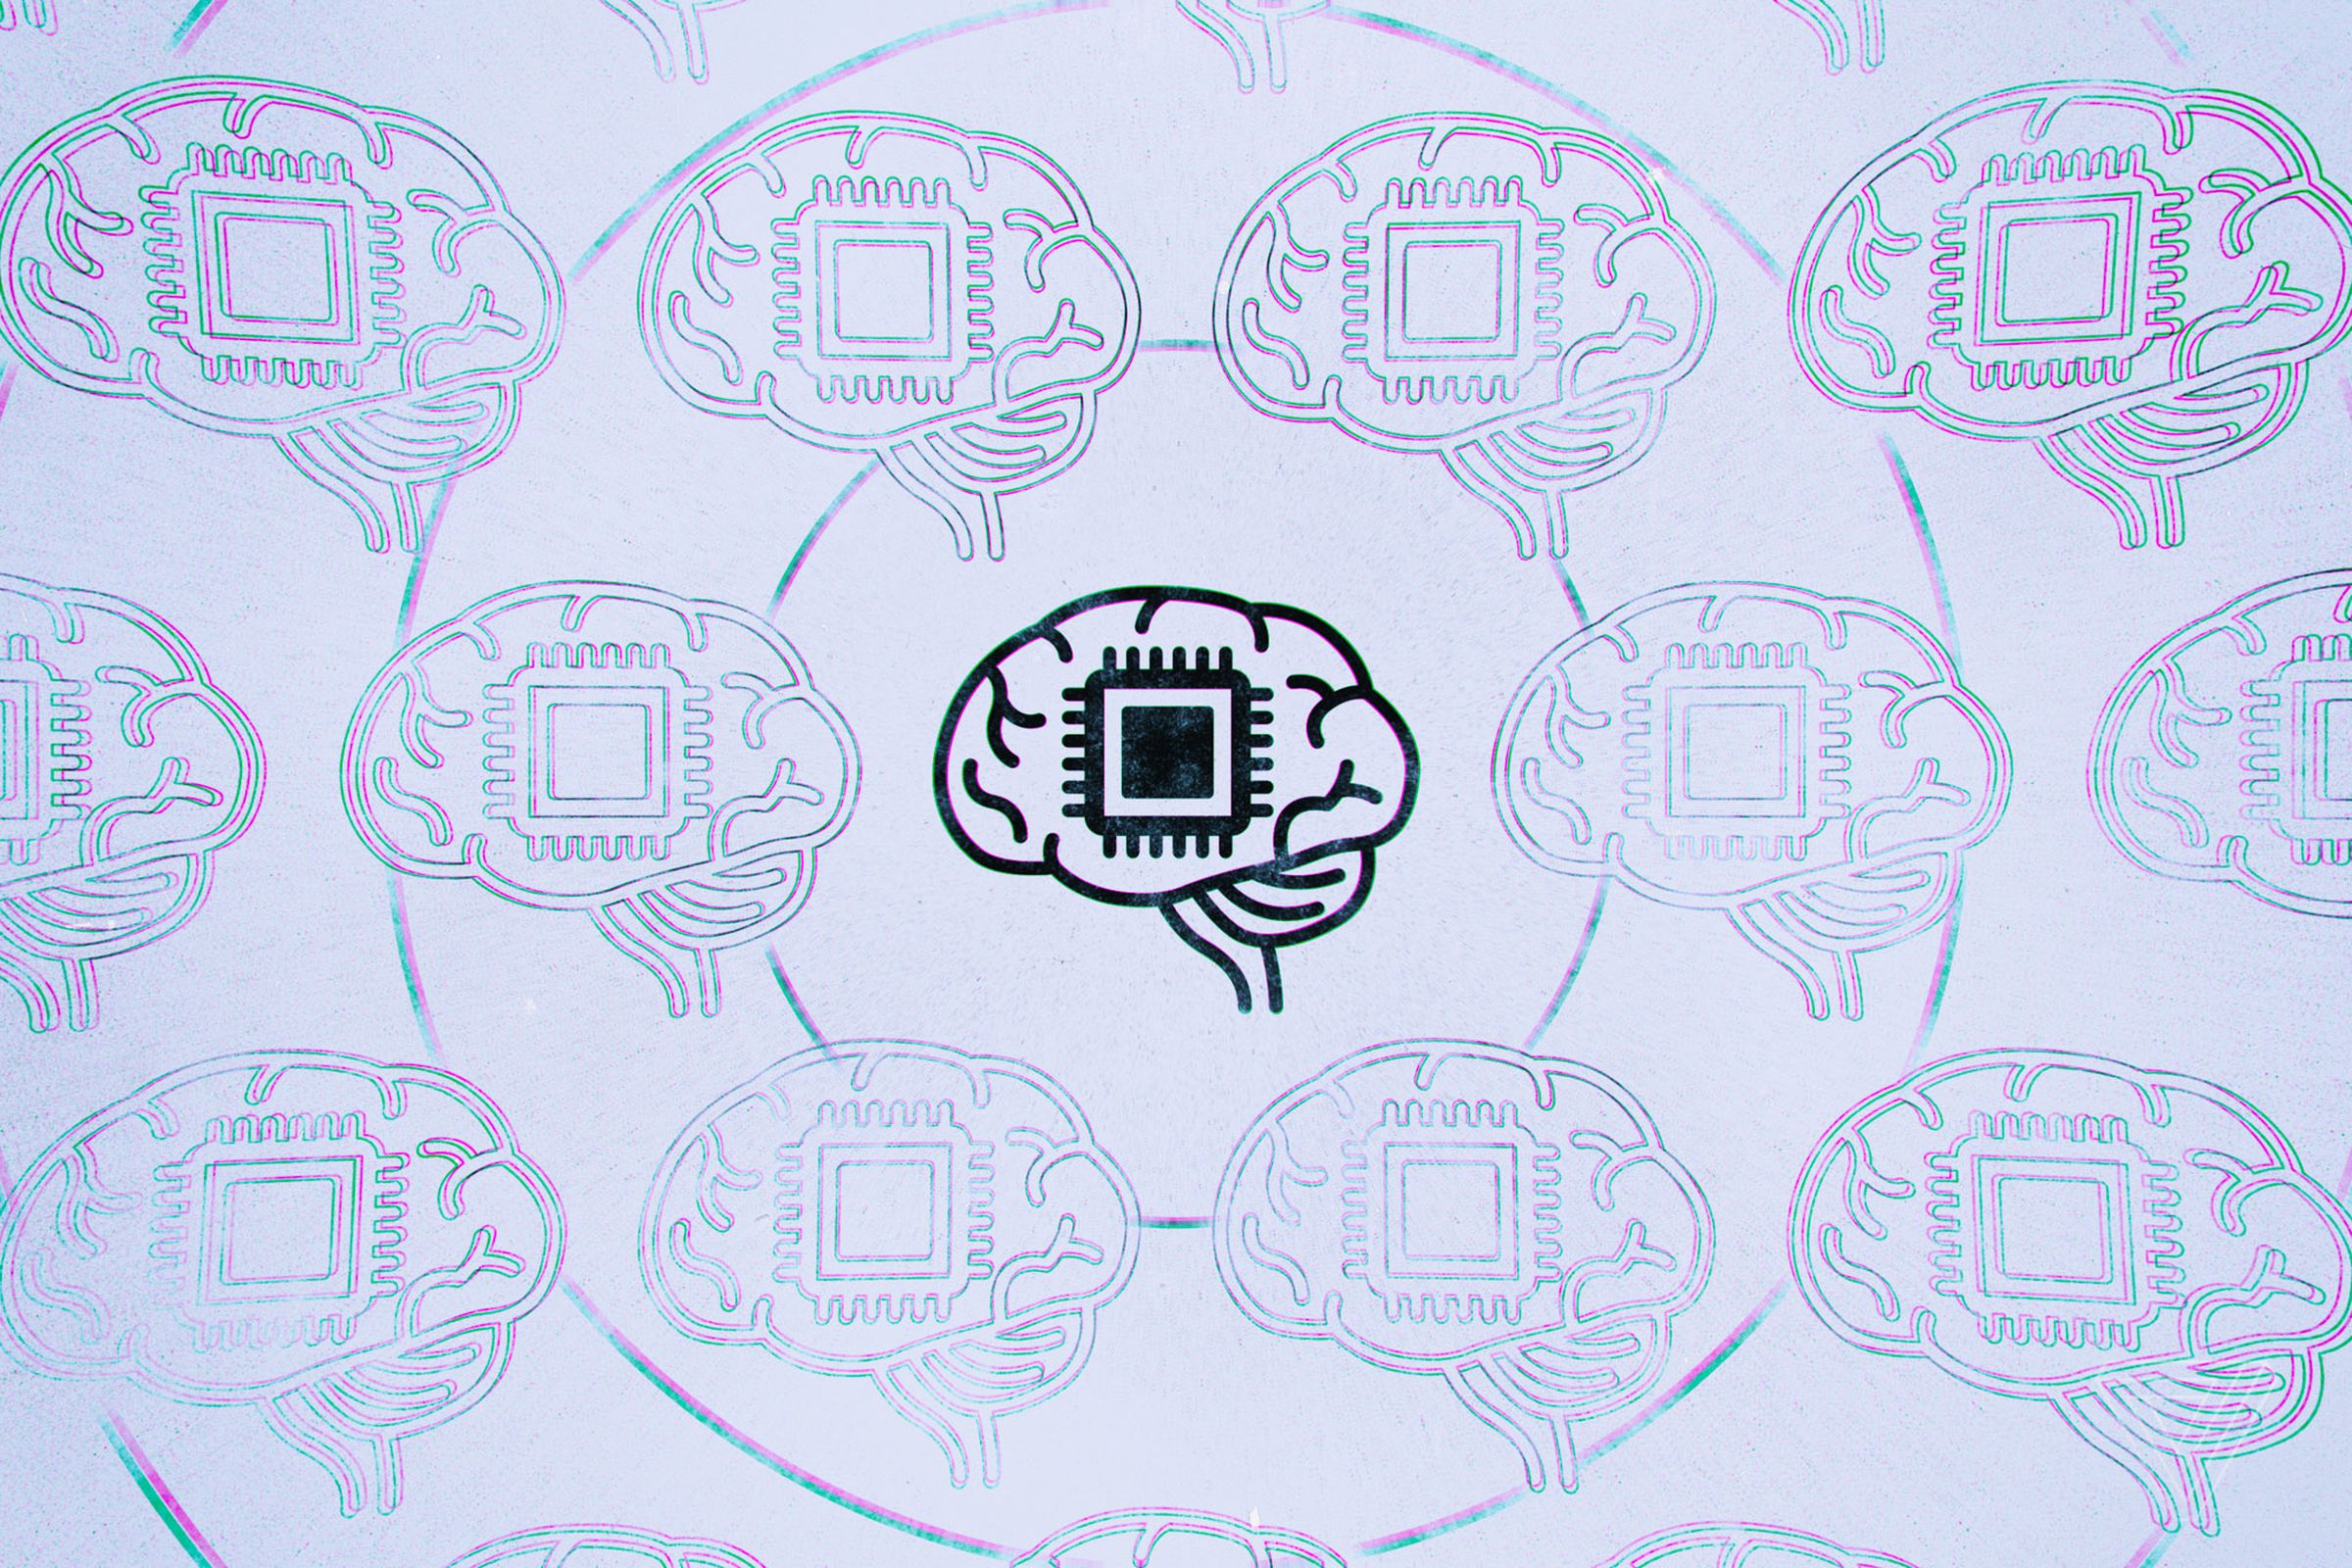 Stock image of computer chip on an illustration of the human brain.